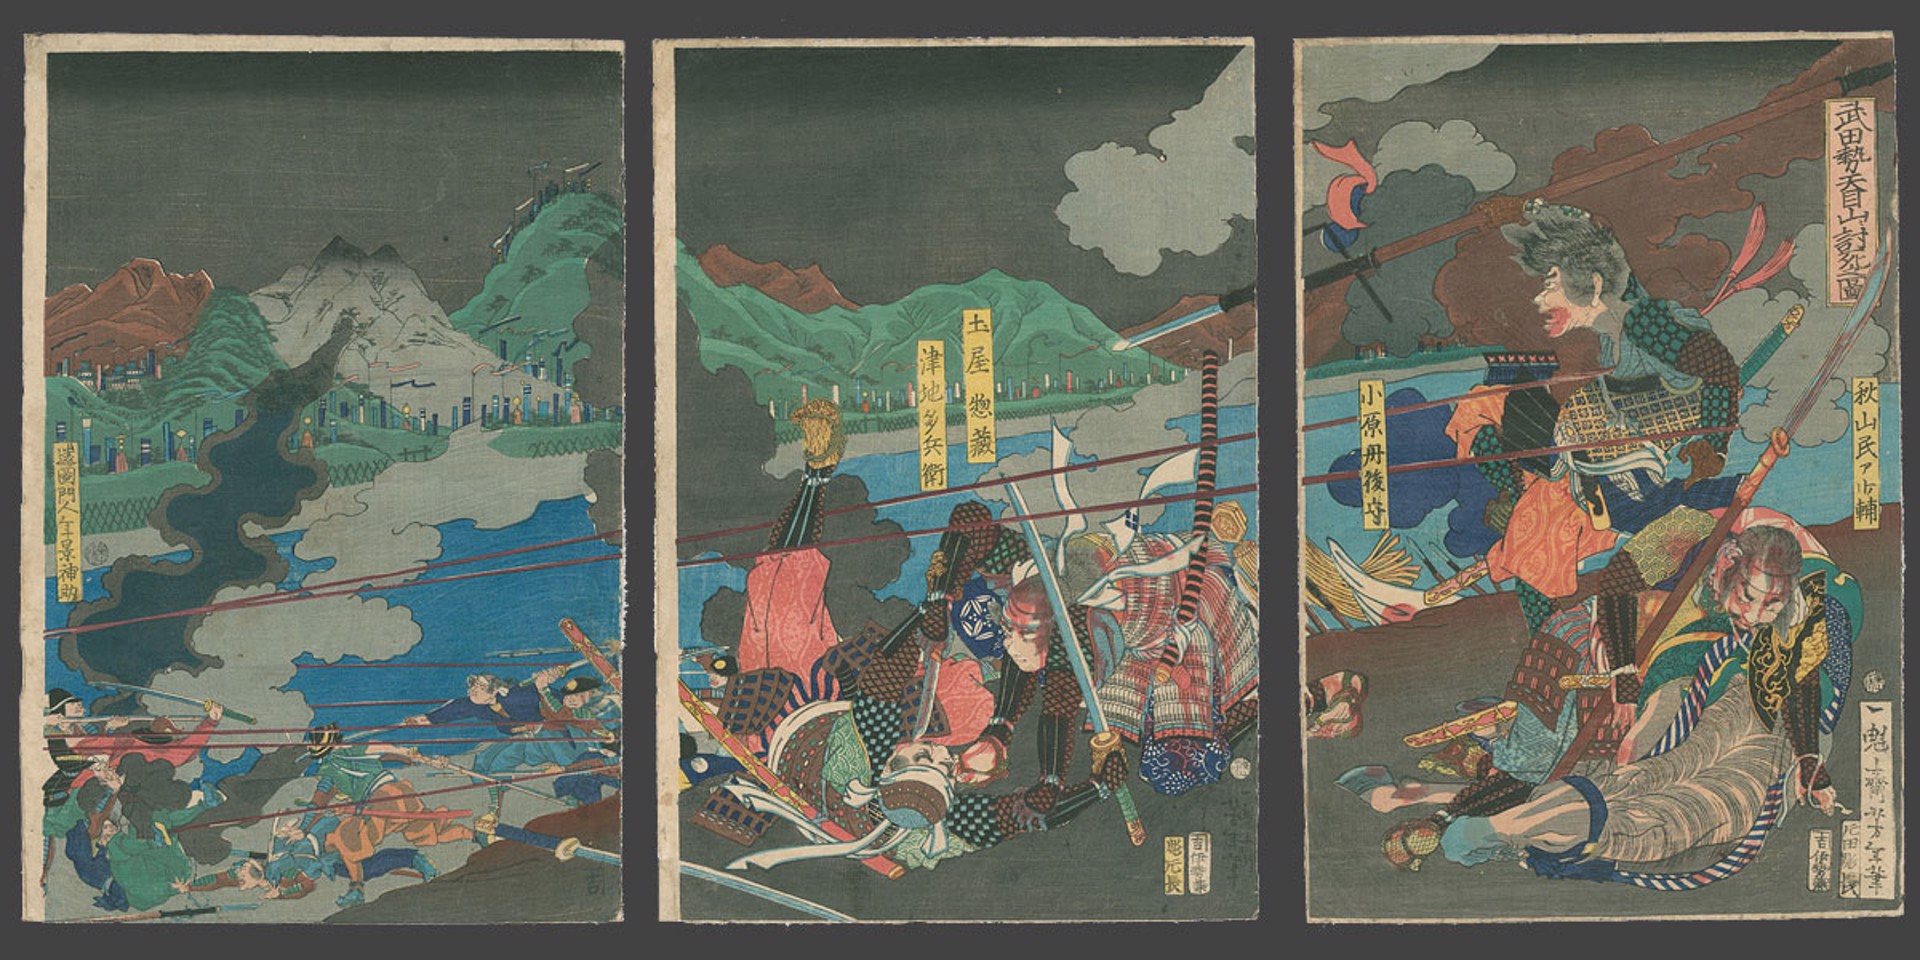 Takeda's Troops Die in the Battle at Mt. Tommoku by Yoshitoshi